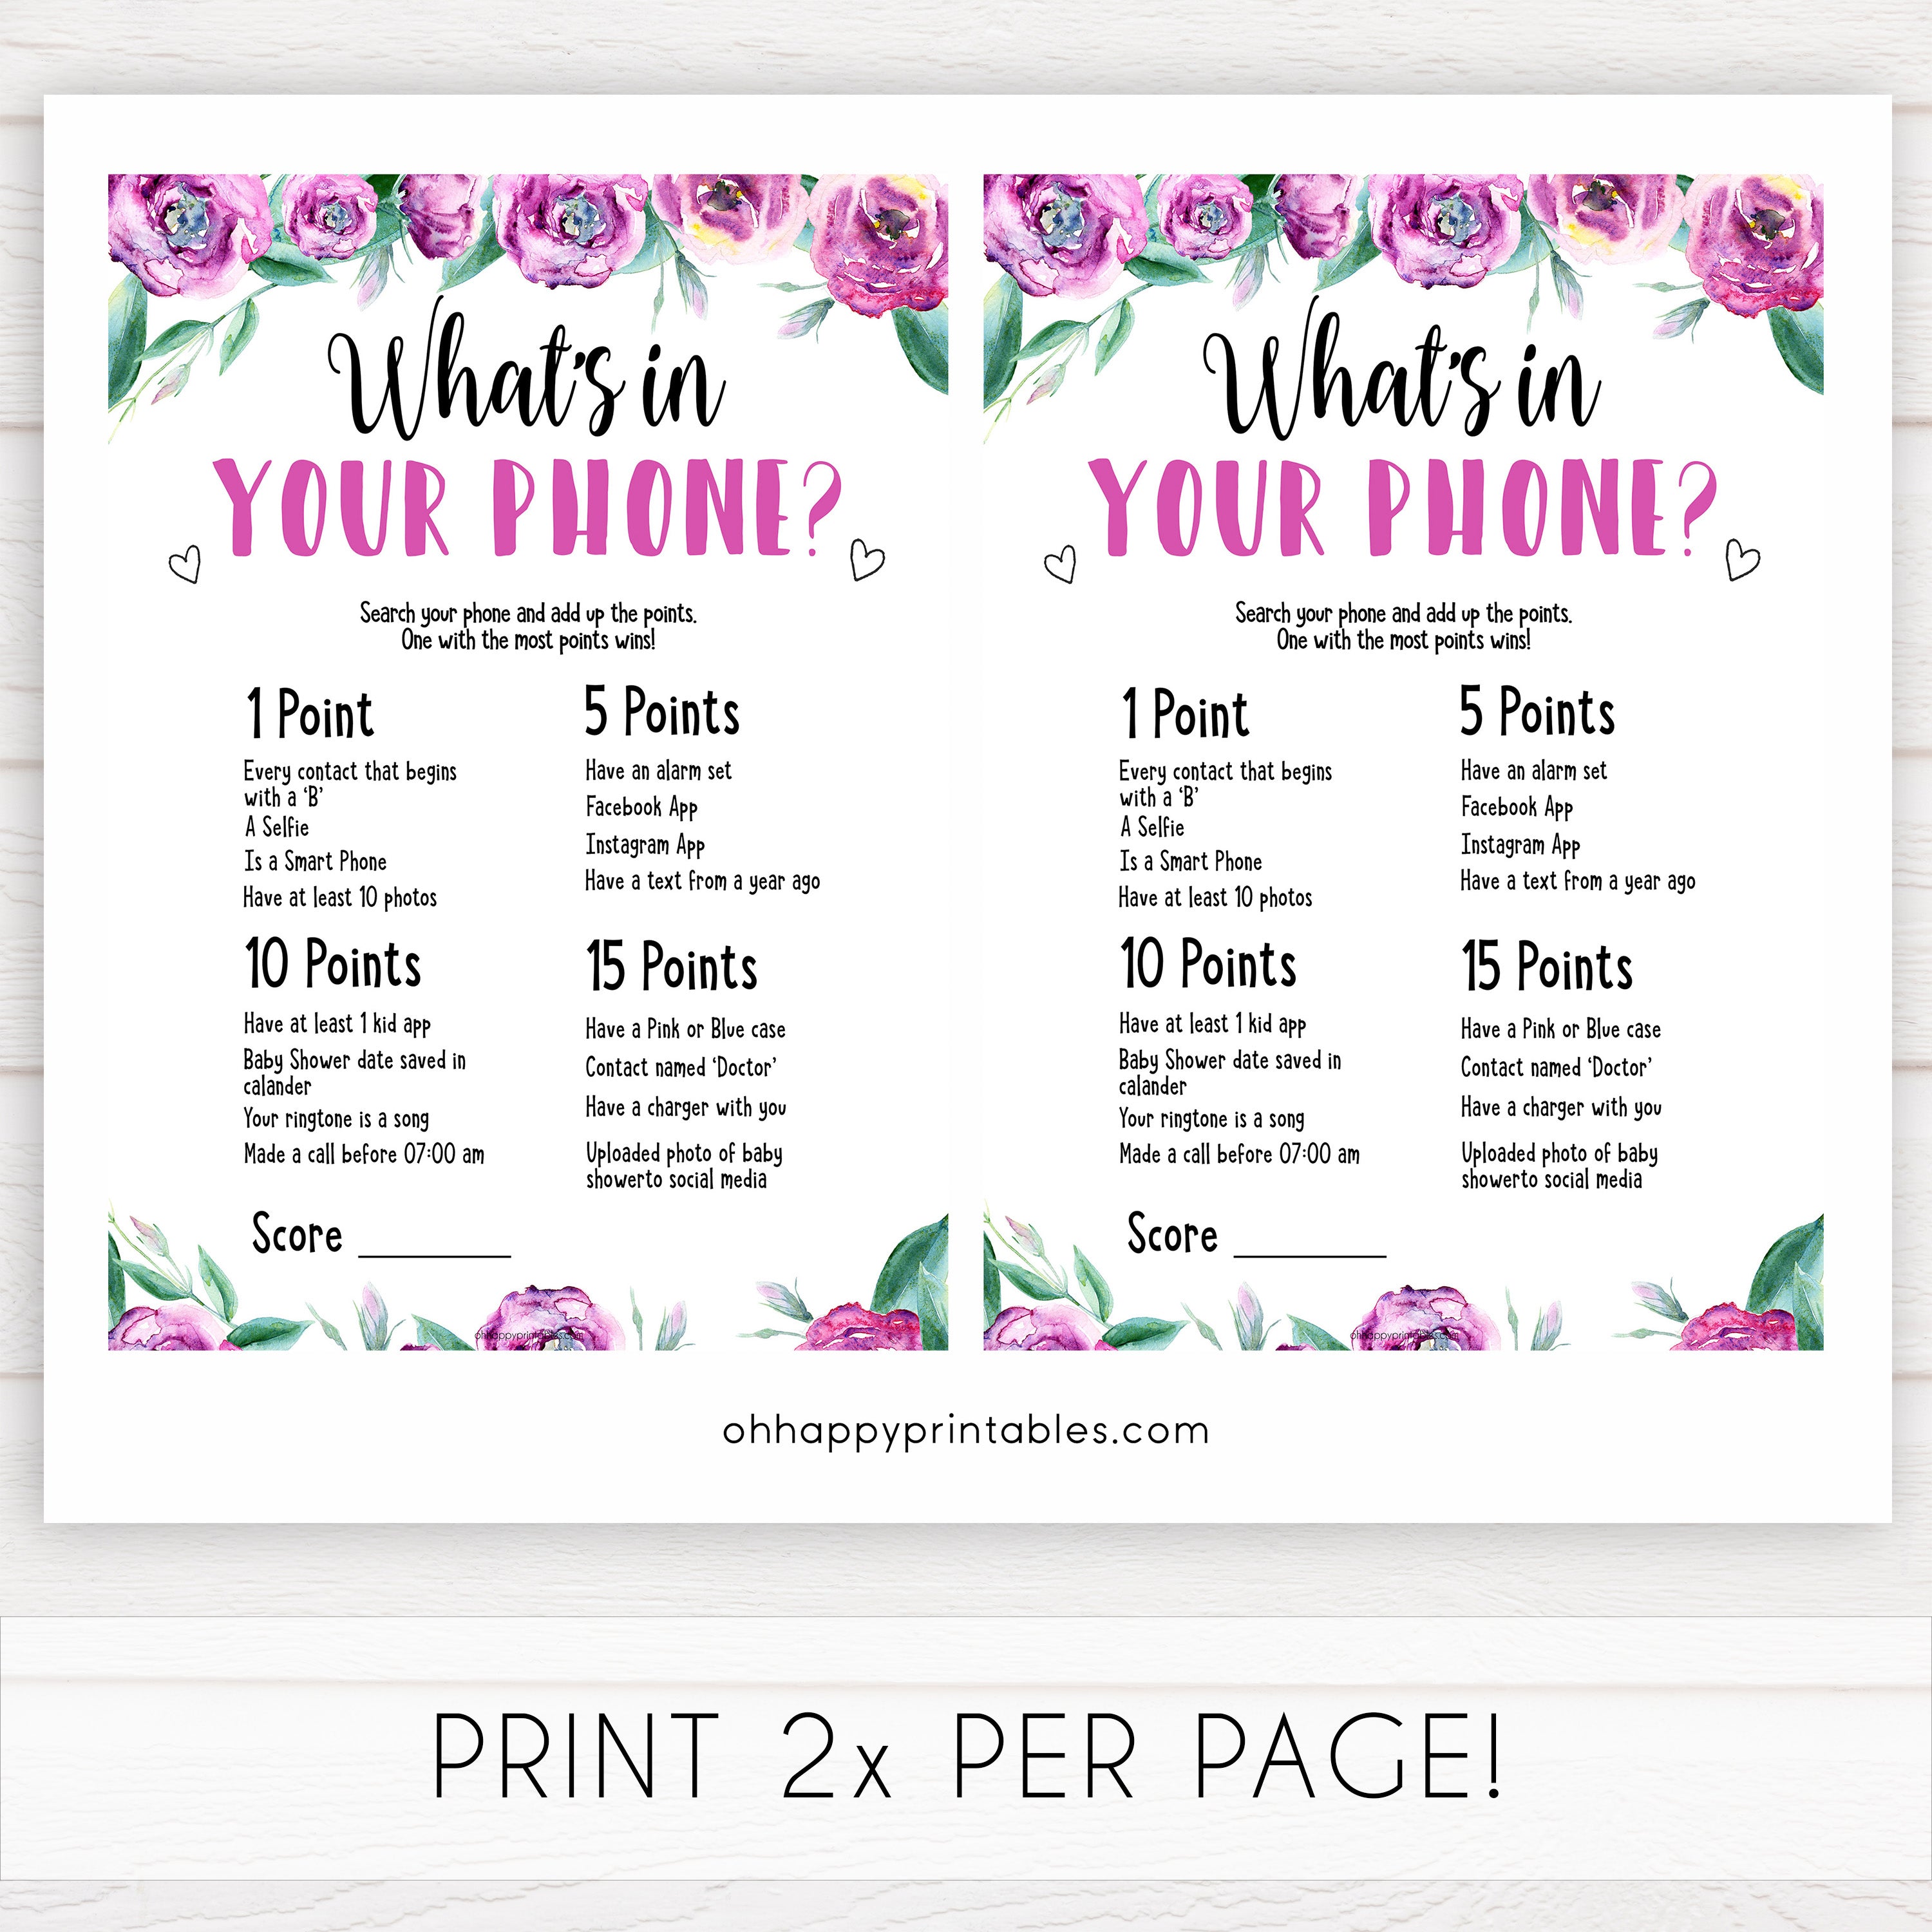 Purple peonies whats in your phone baby shower games, printable baby shower games, fun baby shower games, baby shower games, popular baby shower games, floral baby shower games, purple baby shower themes